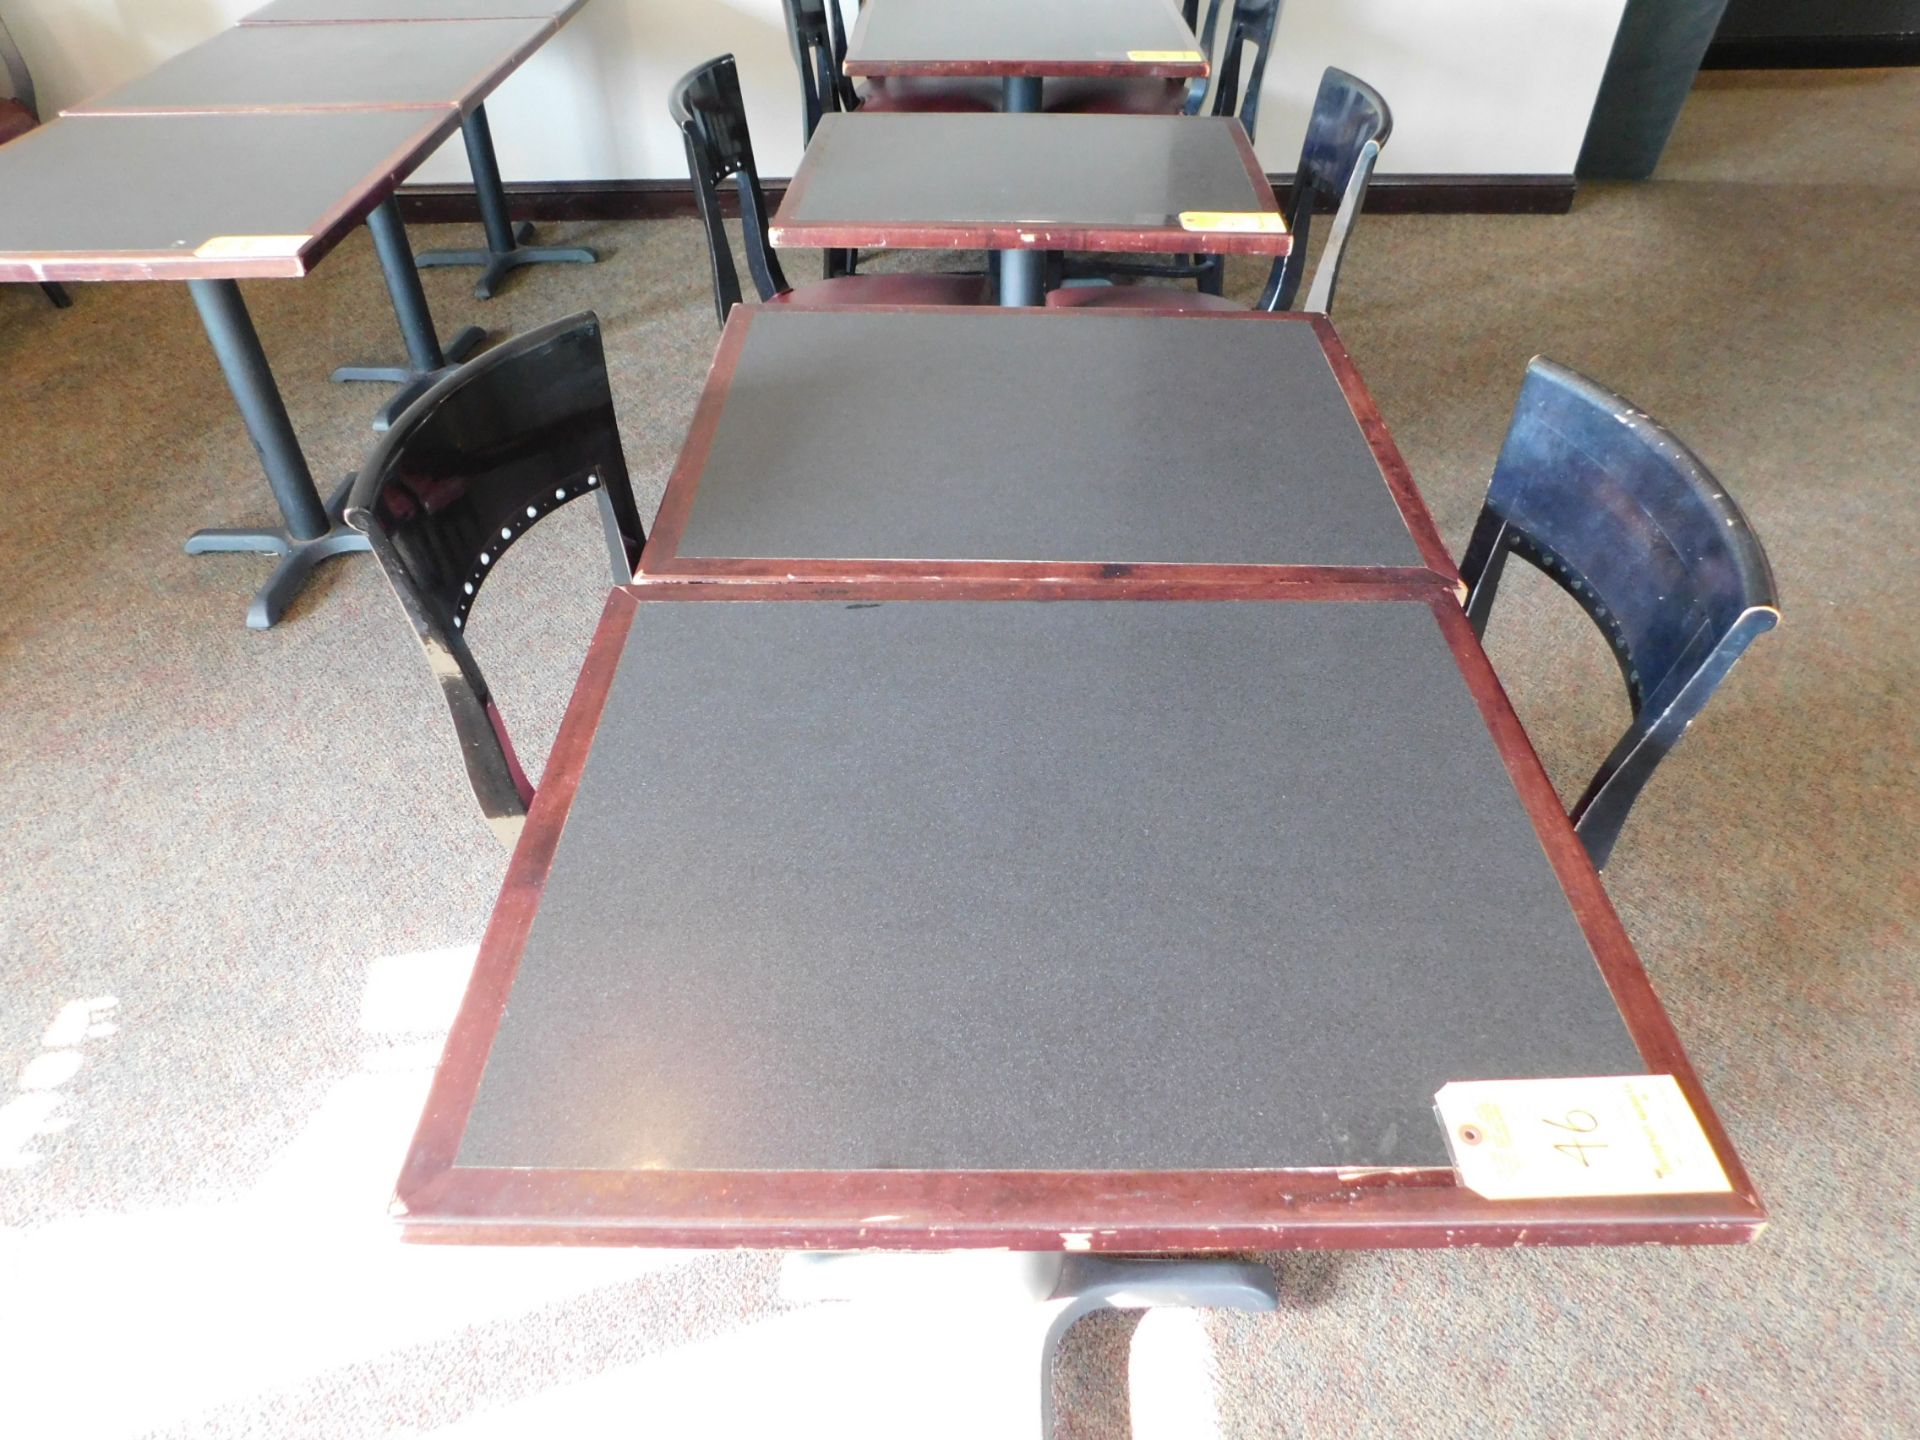 2 Wood Tables 24" W x 30"L, with 2 Chairs